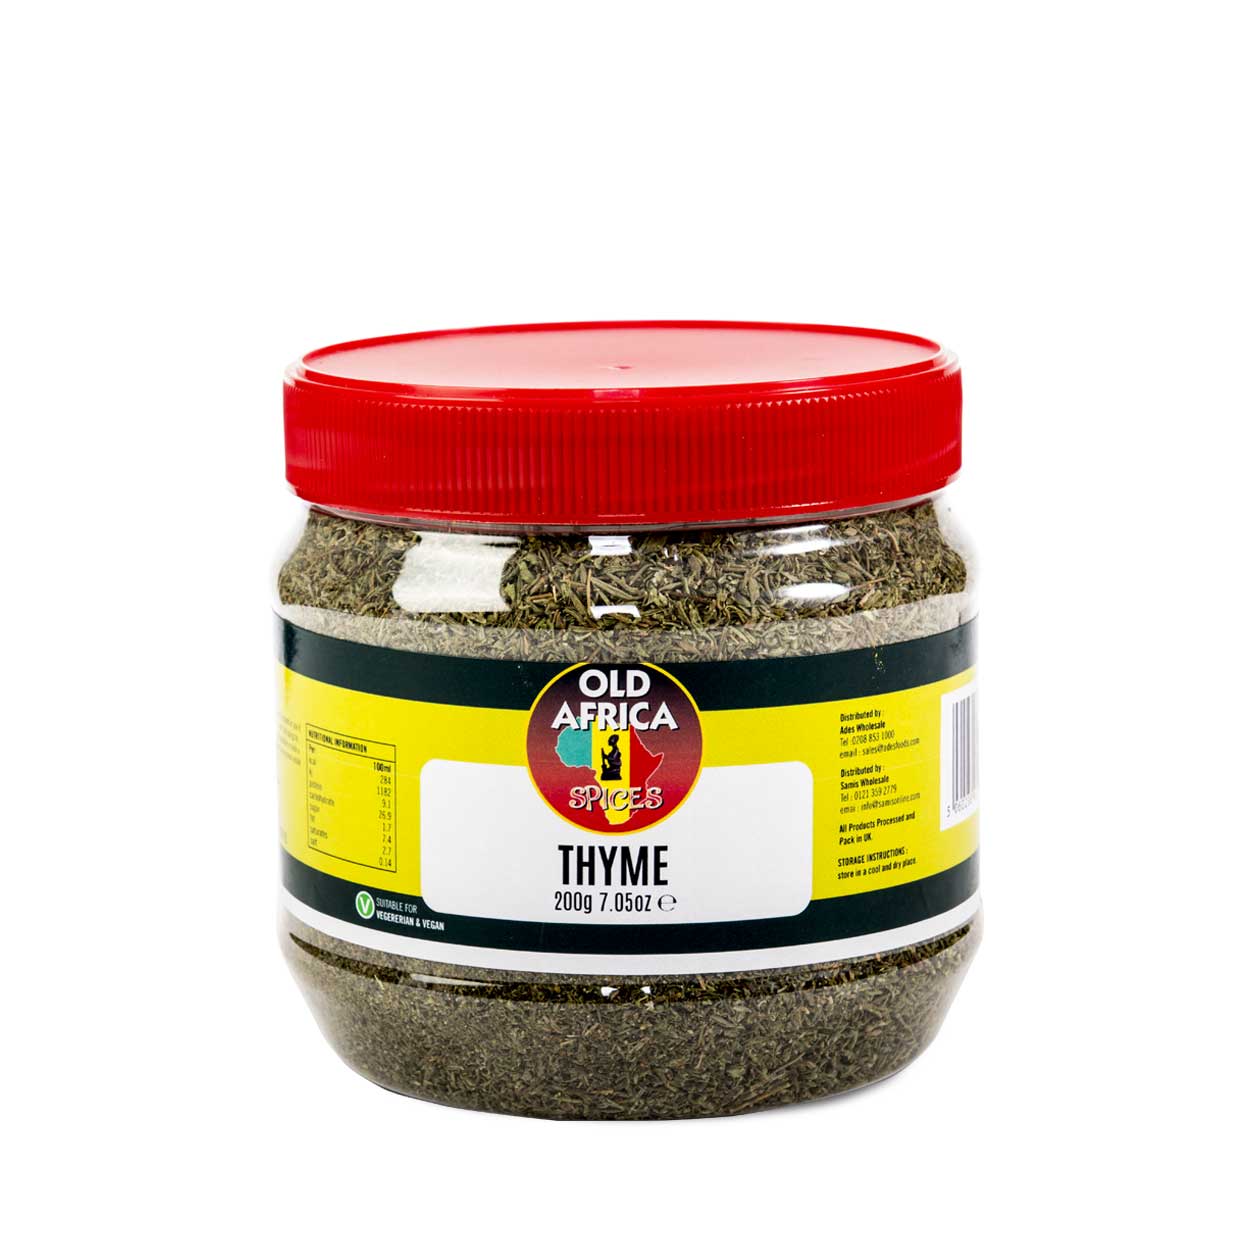 Old Africa Thyme 200G